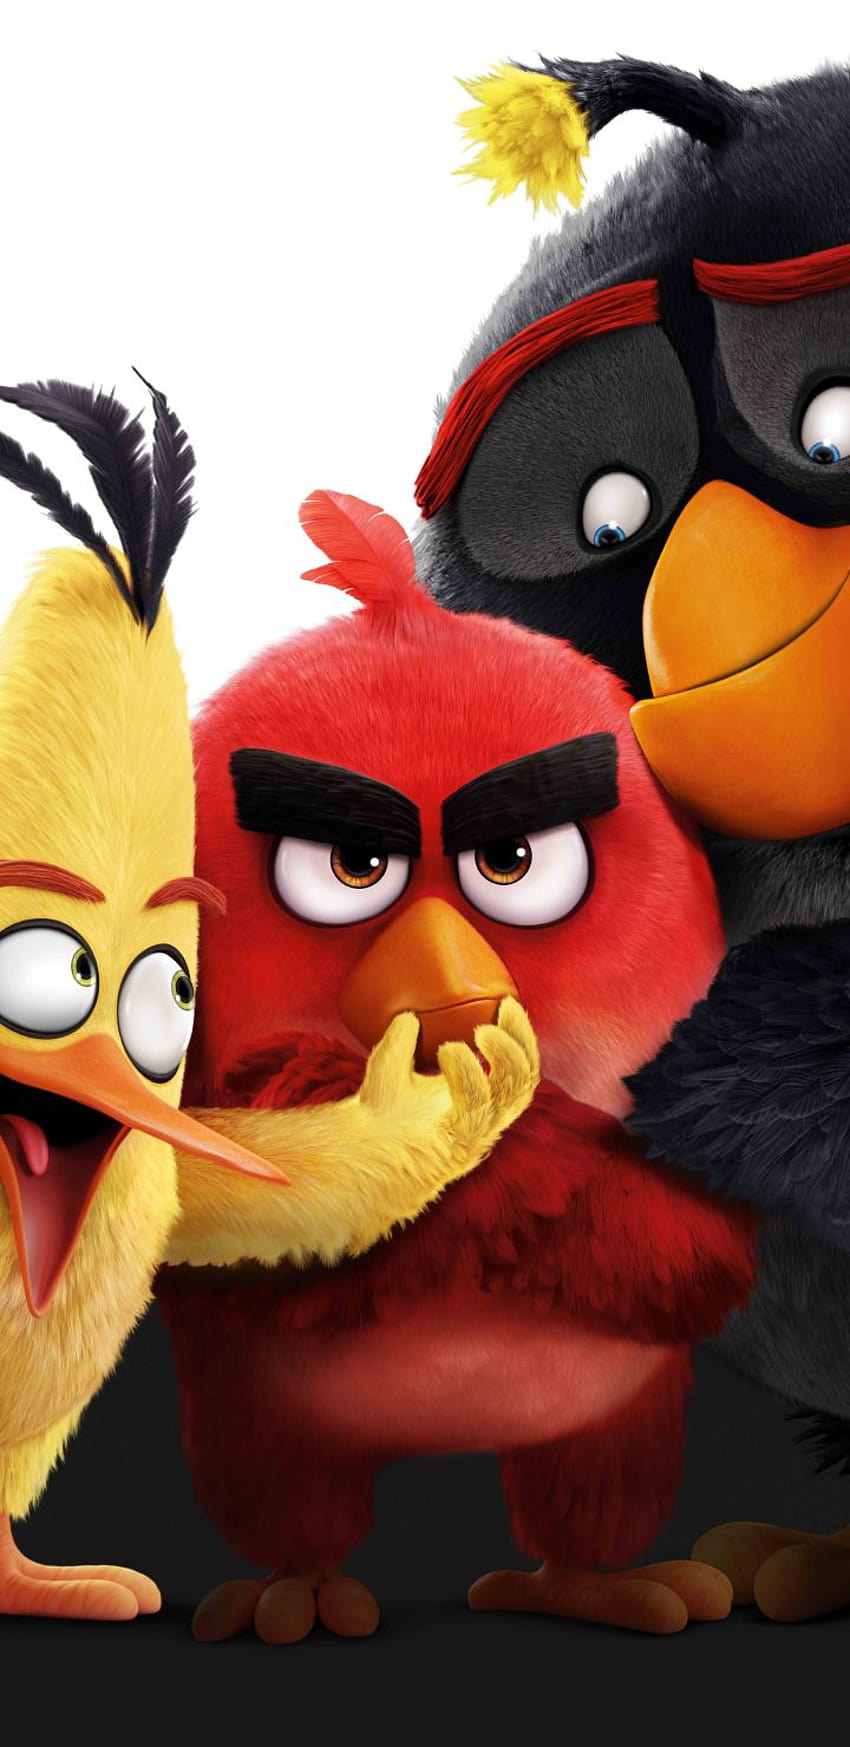 100+] The Angry Birds Movie 2 Wallpapers | Wallpapers.com